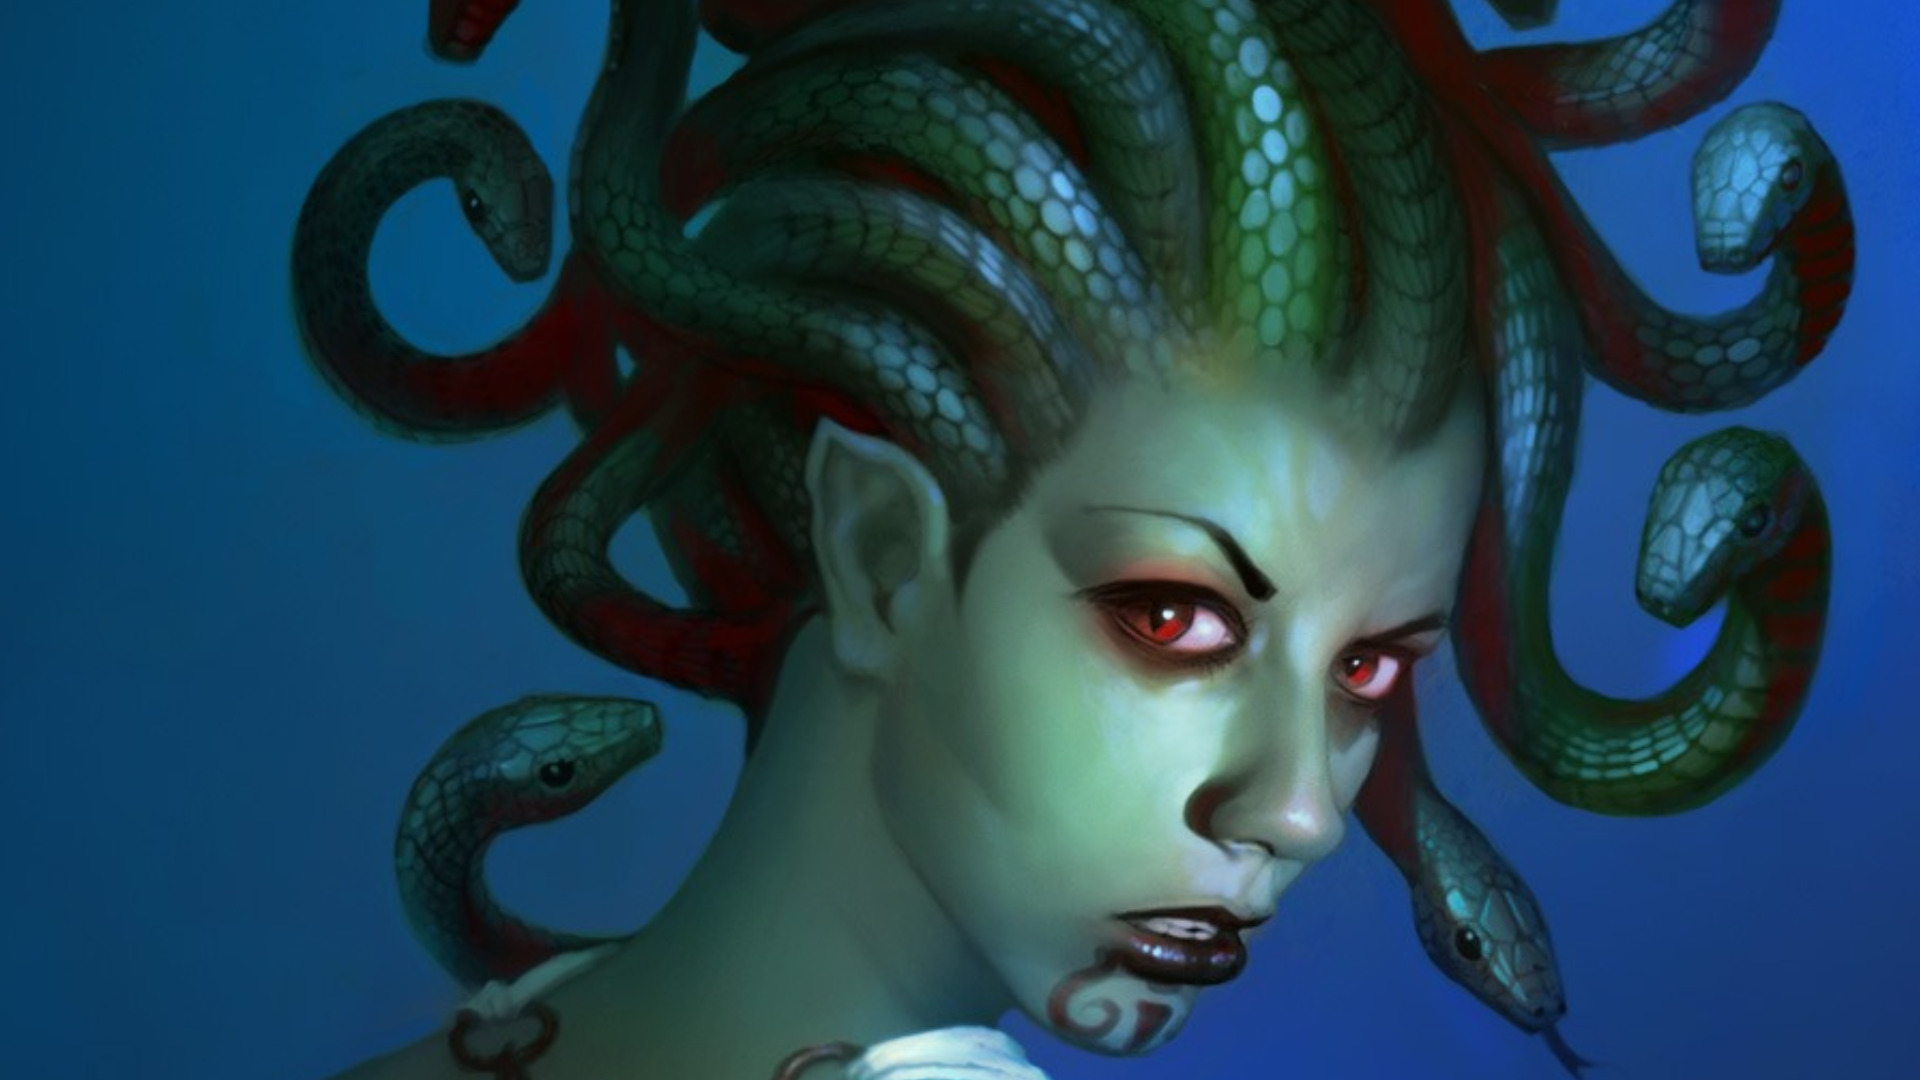 40 Medusa Makeup Stock Photos Pictures  RoyaltyFree Images  iStock